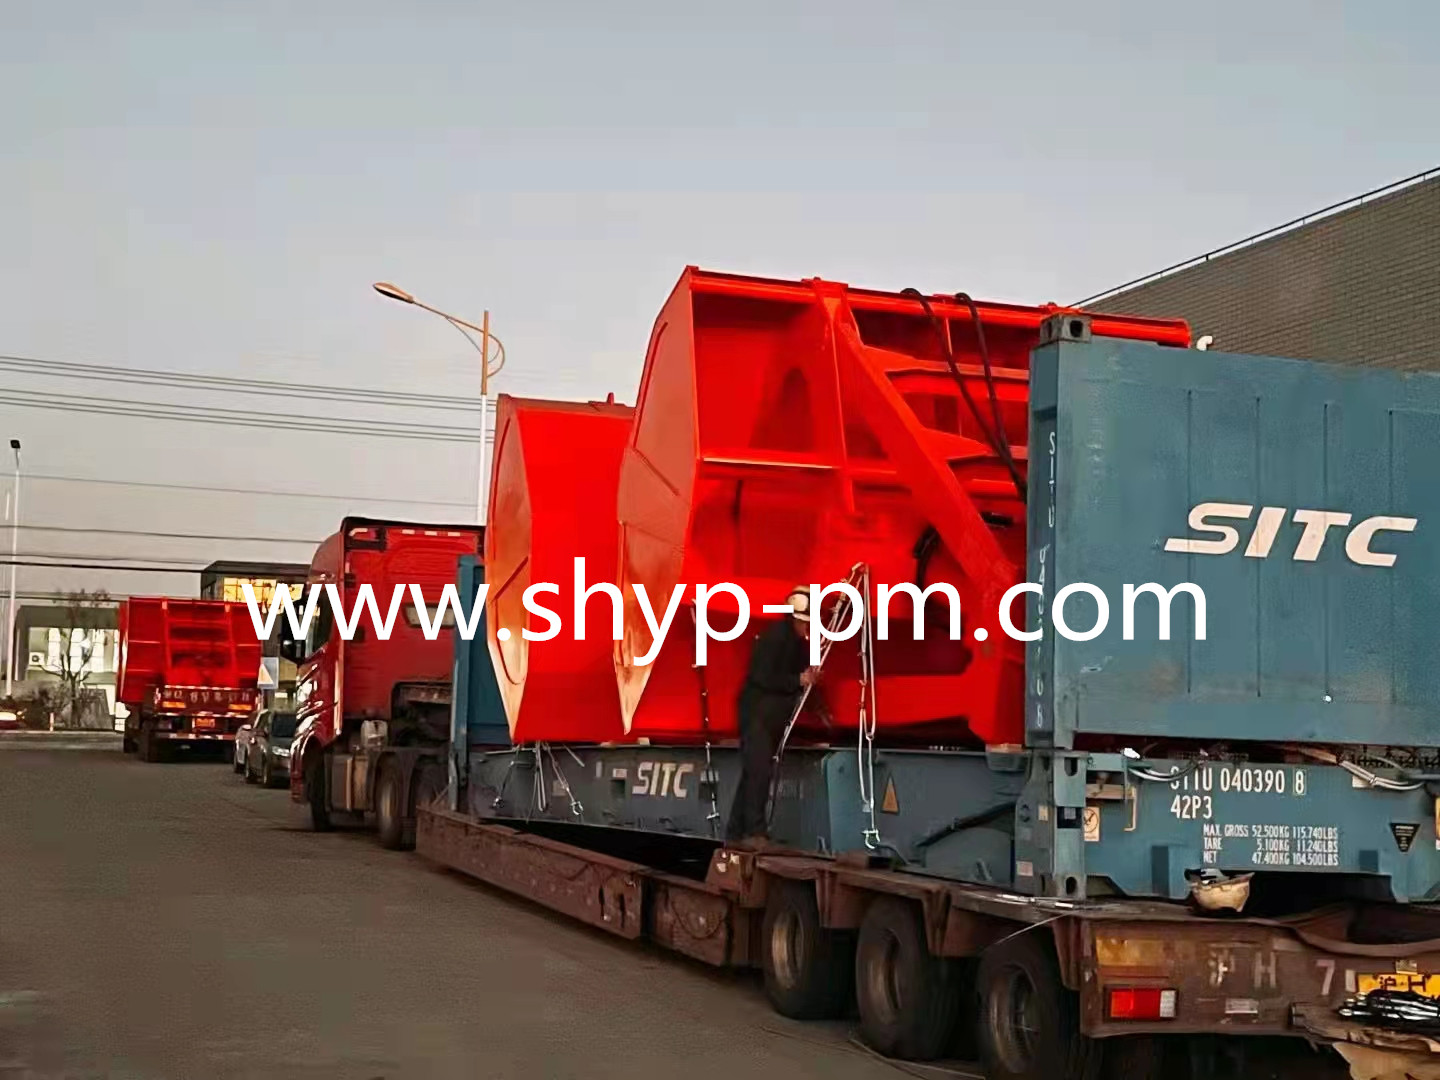 14m3 Radio Remote Control Dual Scoop Cargo Grab Bucket be deliveried to ZhouShan Port